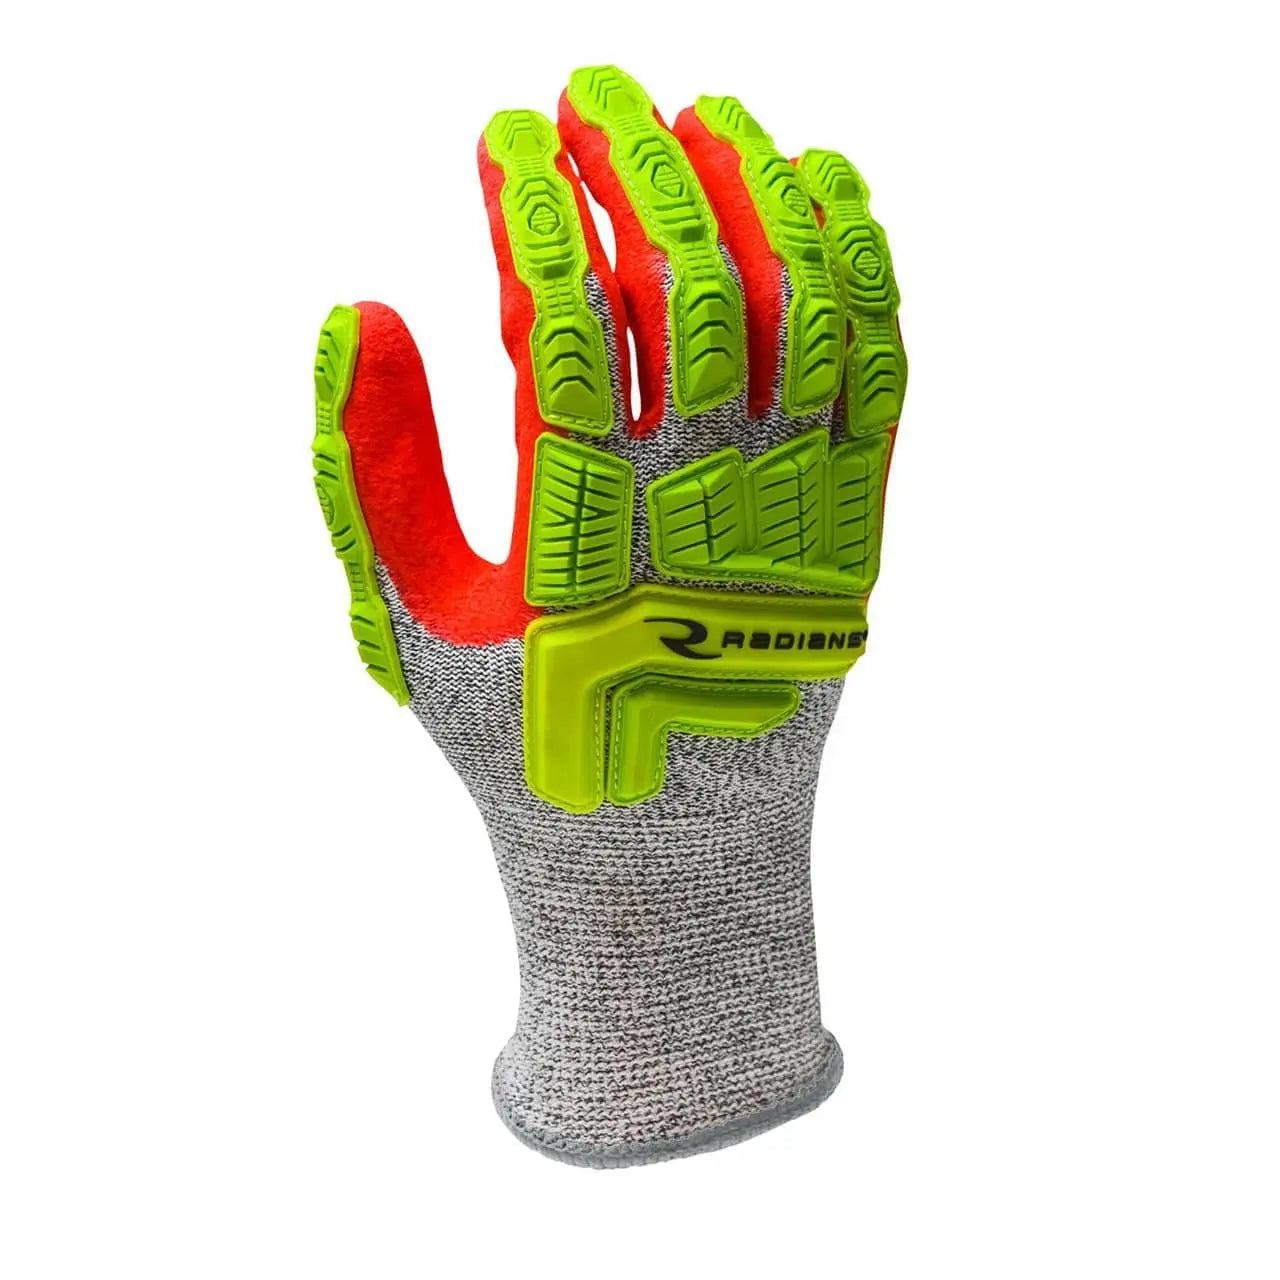 RADIANS - Cut Protection Level A5 Sandy Foam Nitrile Coated Glove - Becker Safety and Supply